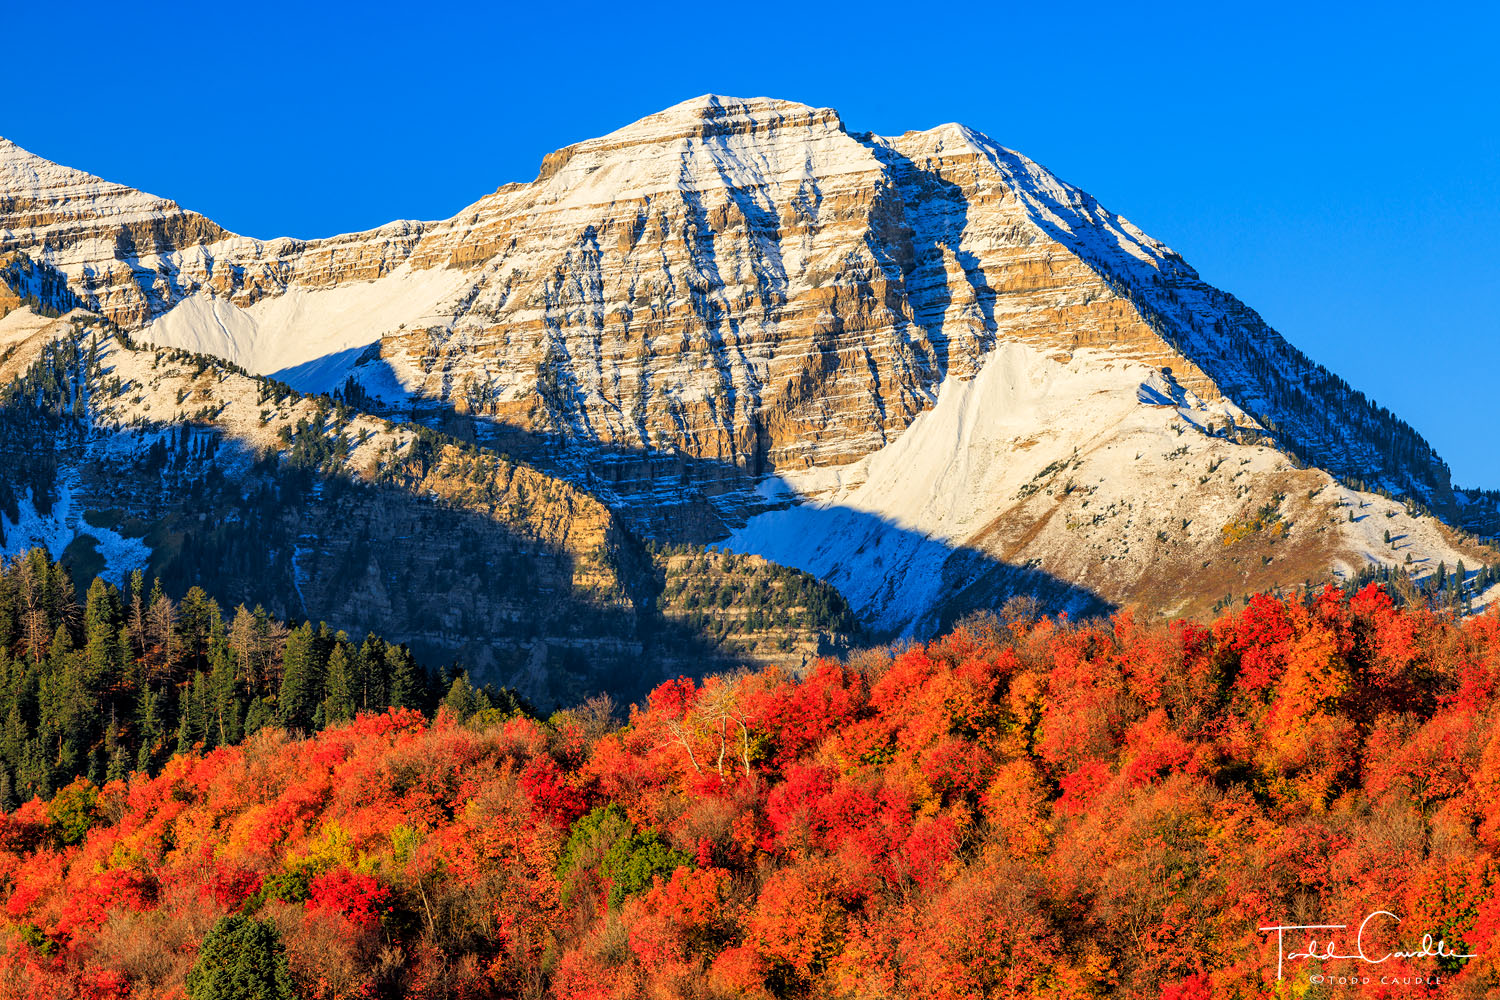 North Timpanogos, a prominent subpeak of the mighty Mount Timpanogos massif, sports a fresh dusting of snow above hillsides resplendent...